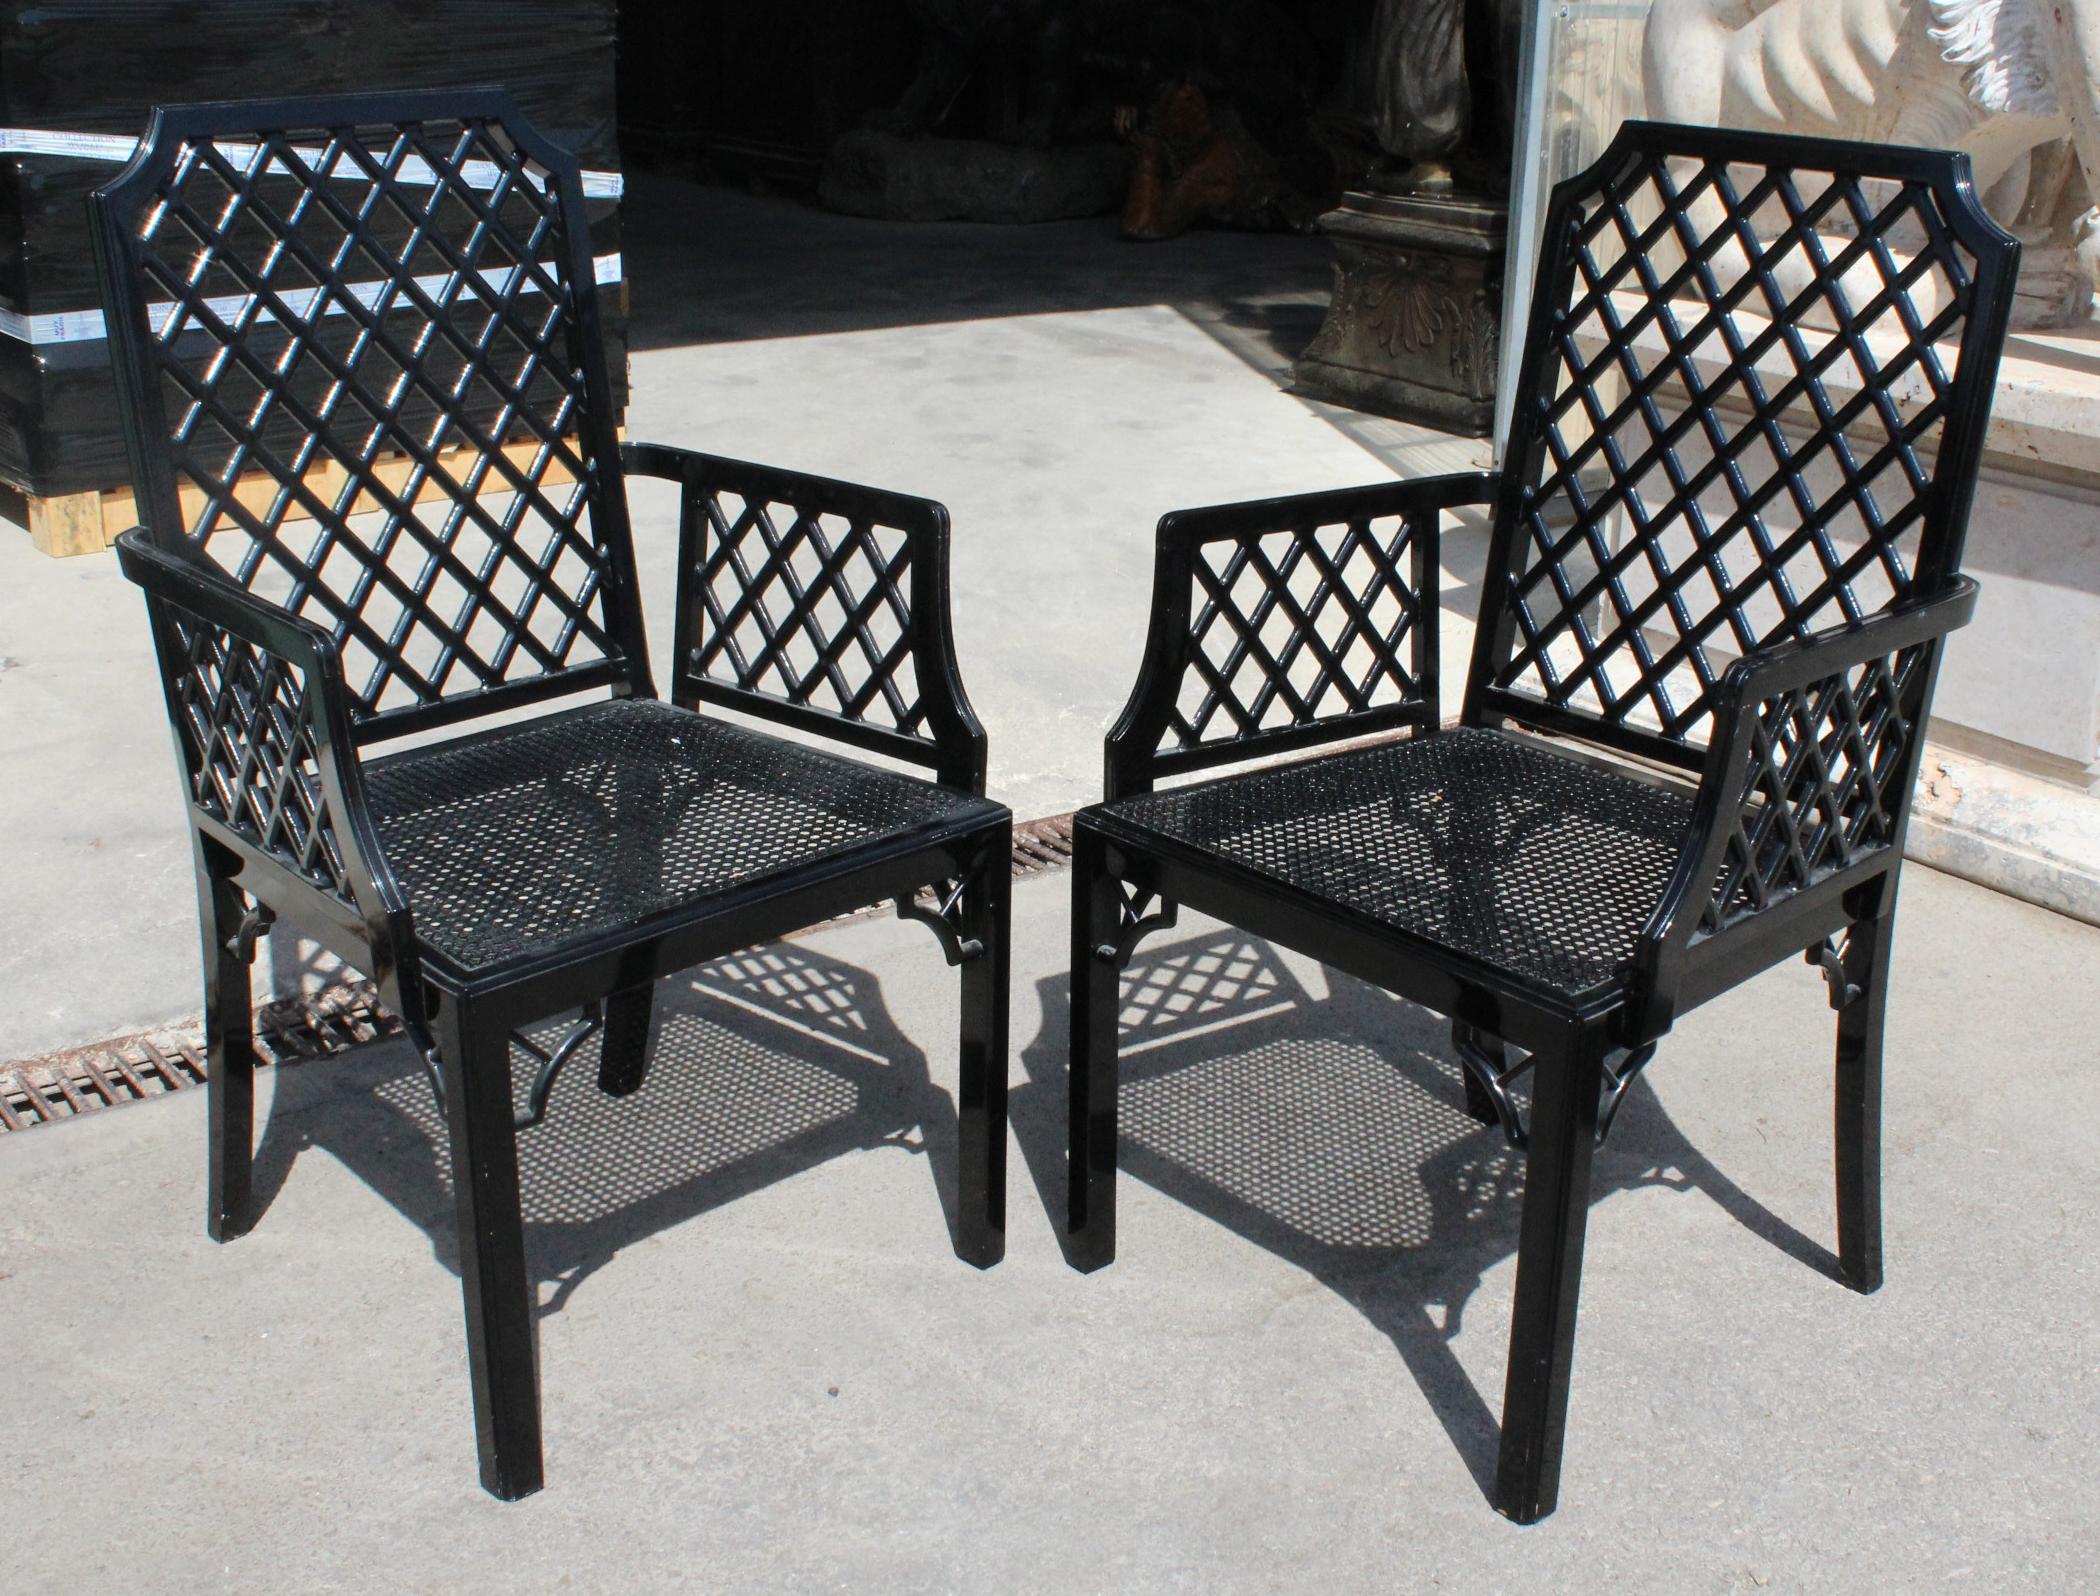 1980s pair of English black lacquered armchairs with grid pattern backrest.